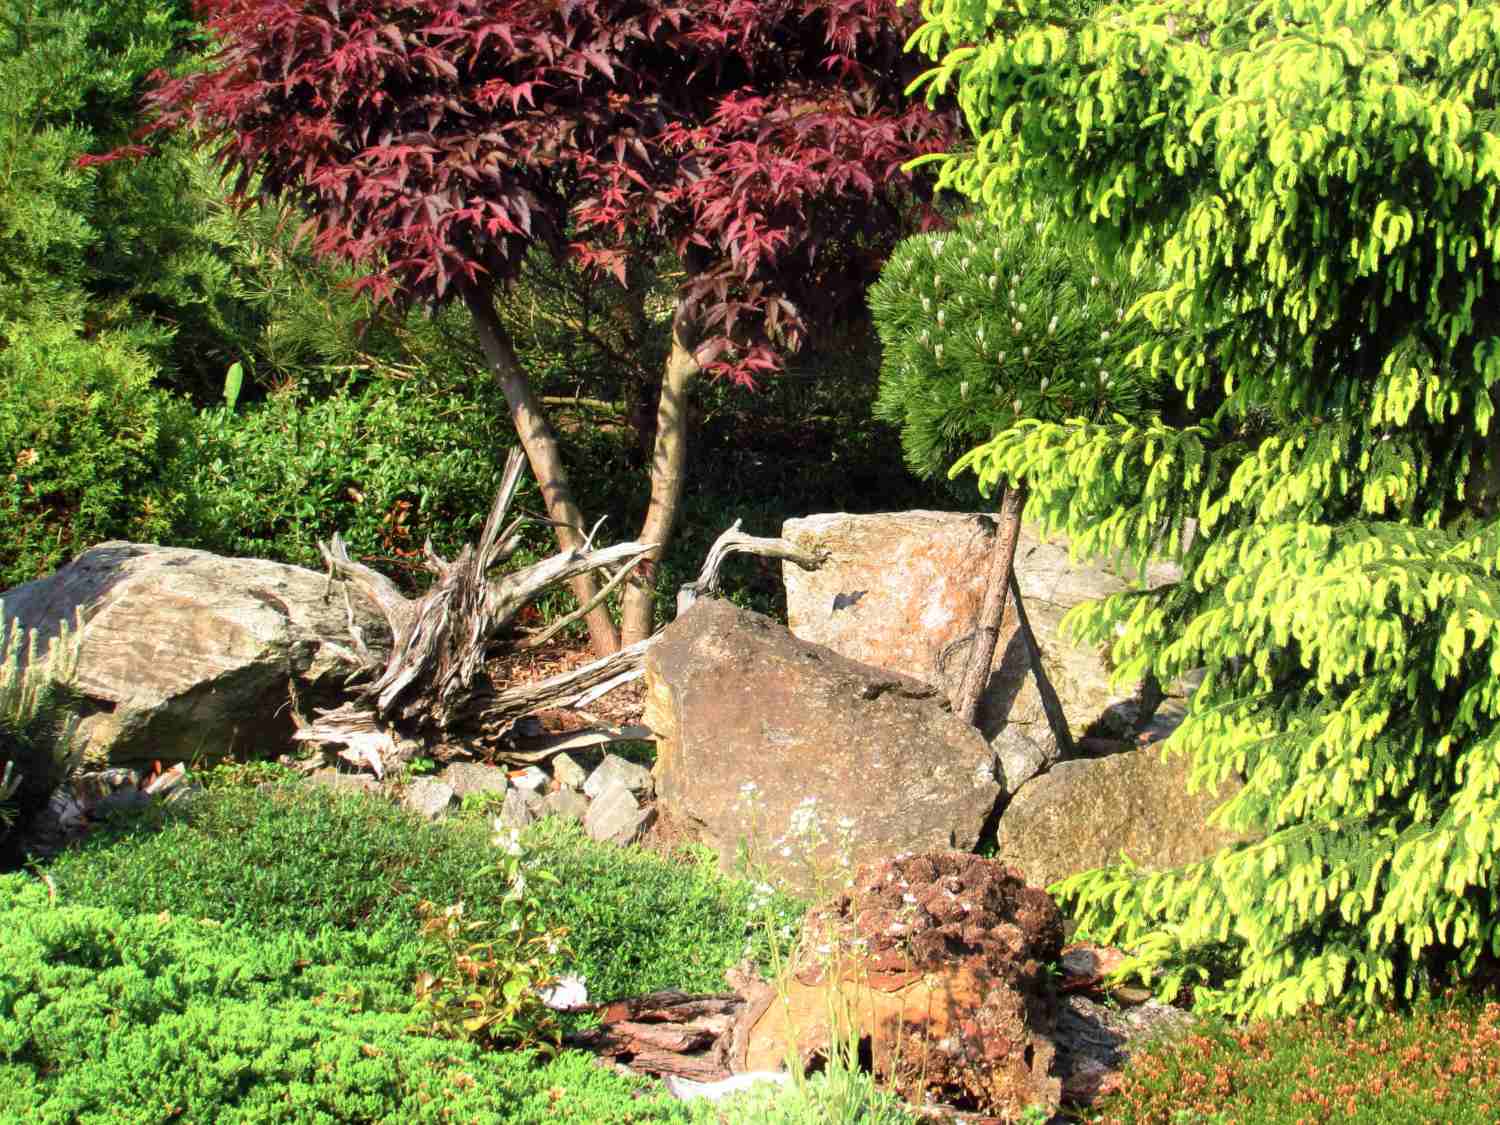 Stone and wood garden ideas